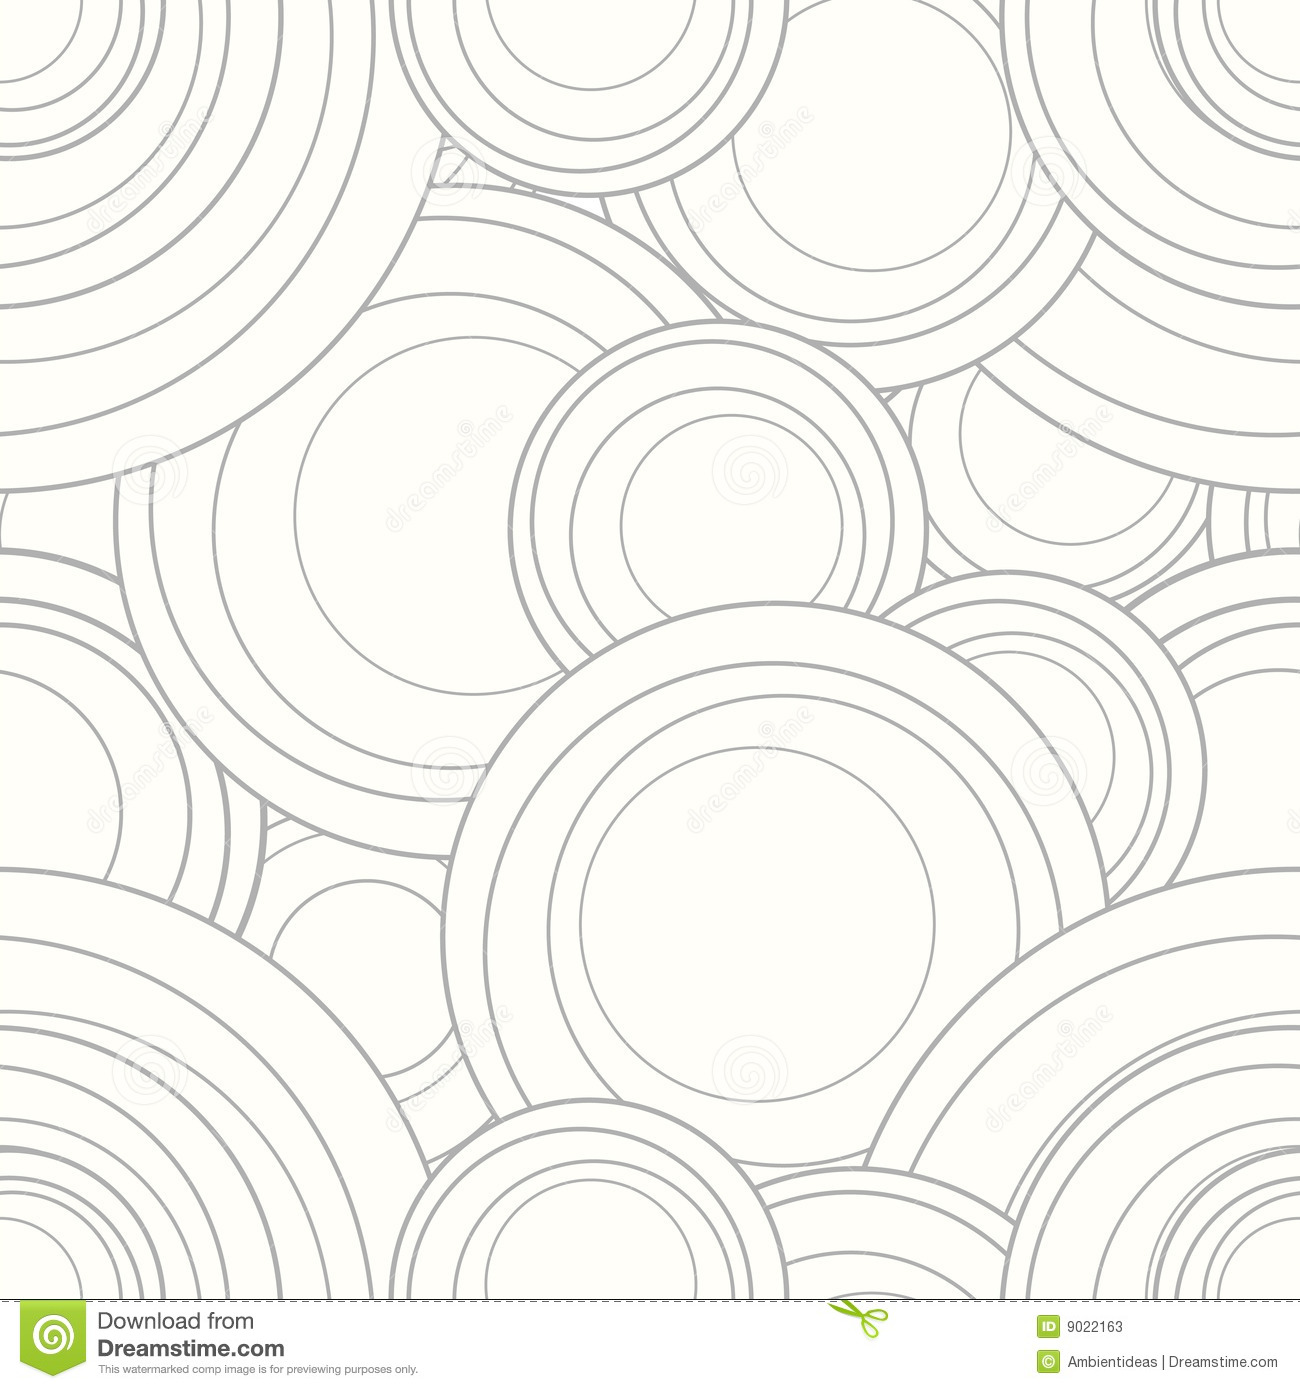 Stock Images Of   Vector Interlocking Circles Repeat Tile Pattern